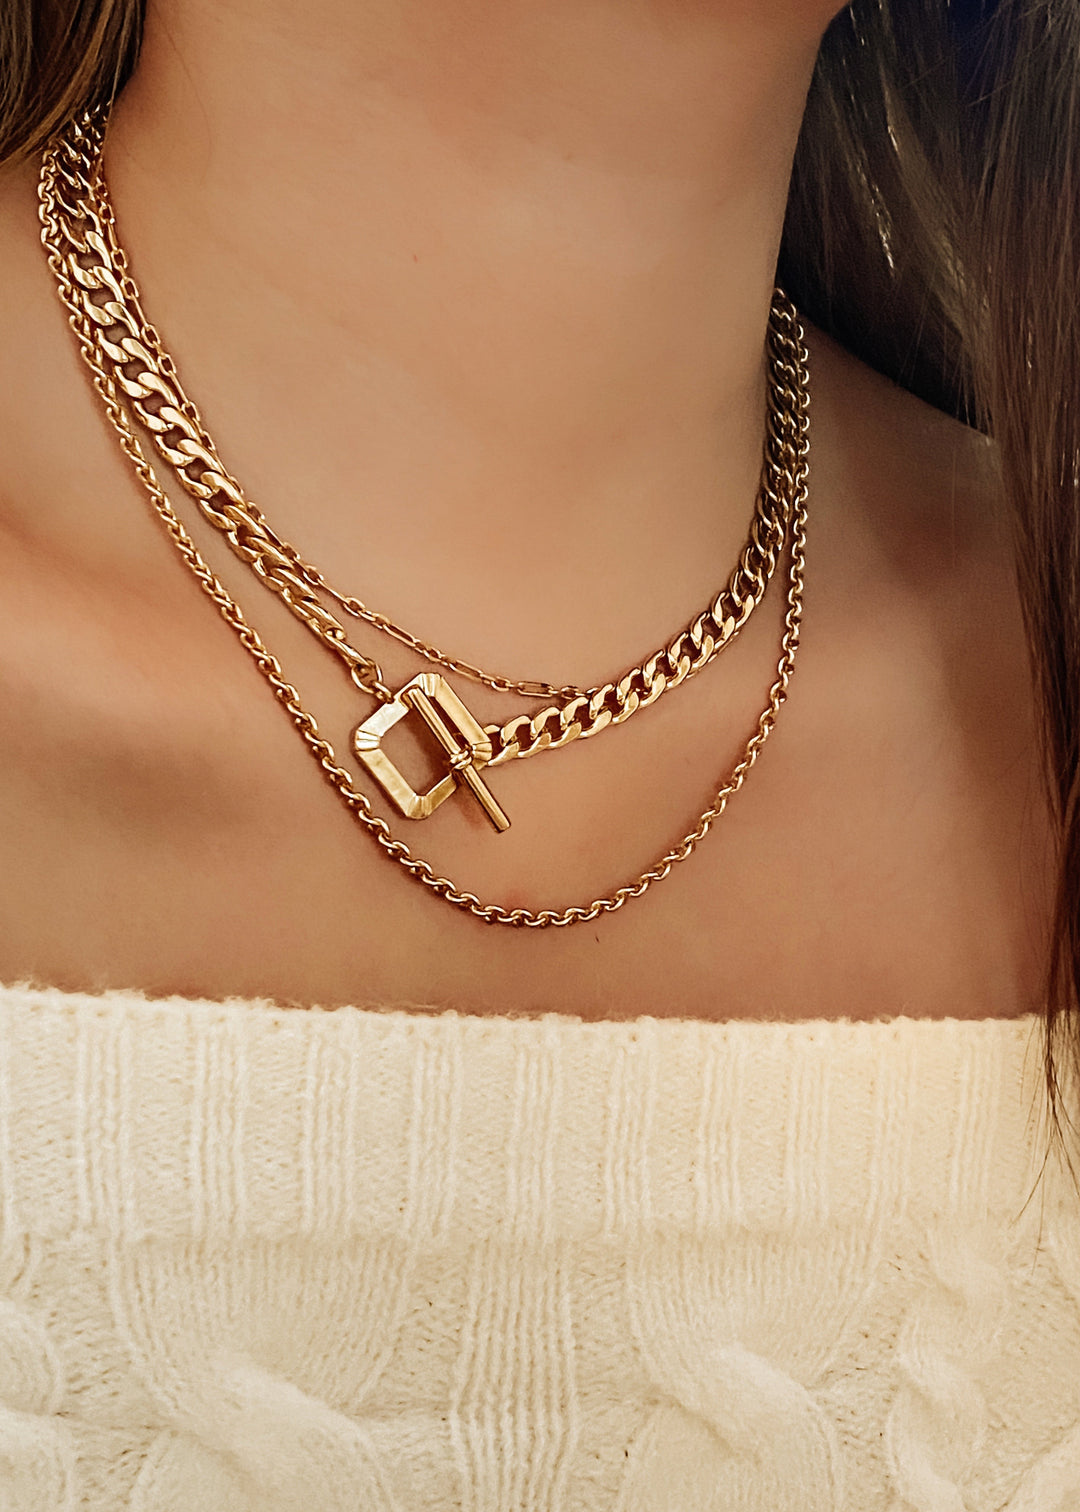 Charlie Cuban Chain Necklace - Gold Filled